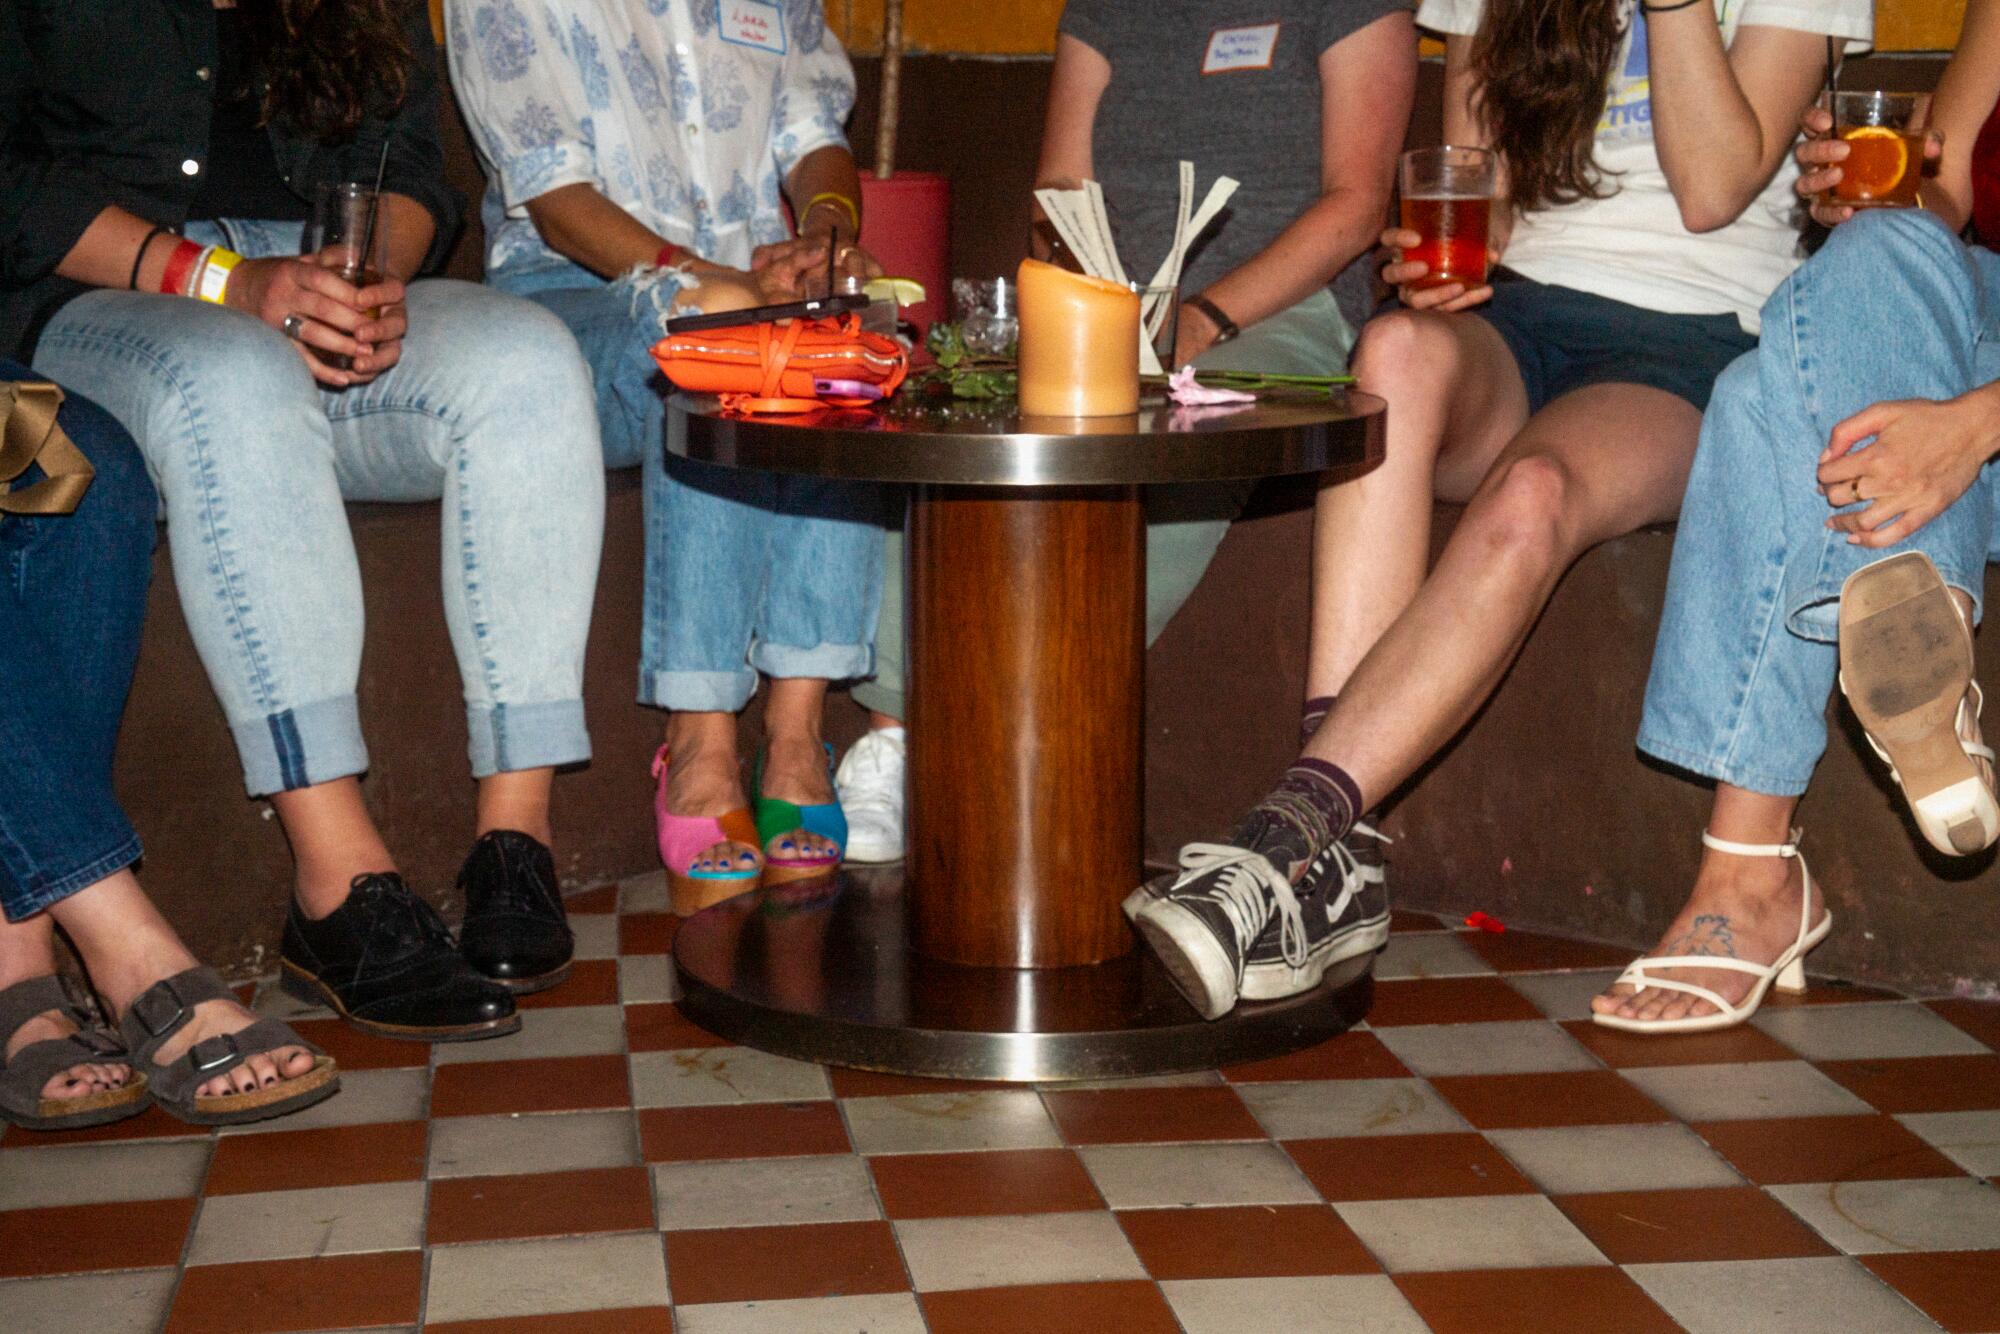 Six sets of feet of people sitting around a small table full of cocktails and a candle